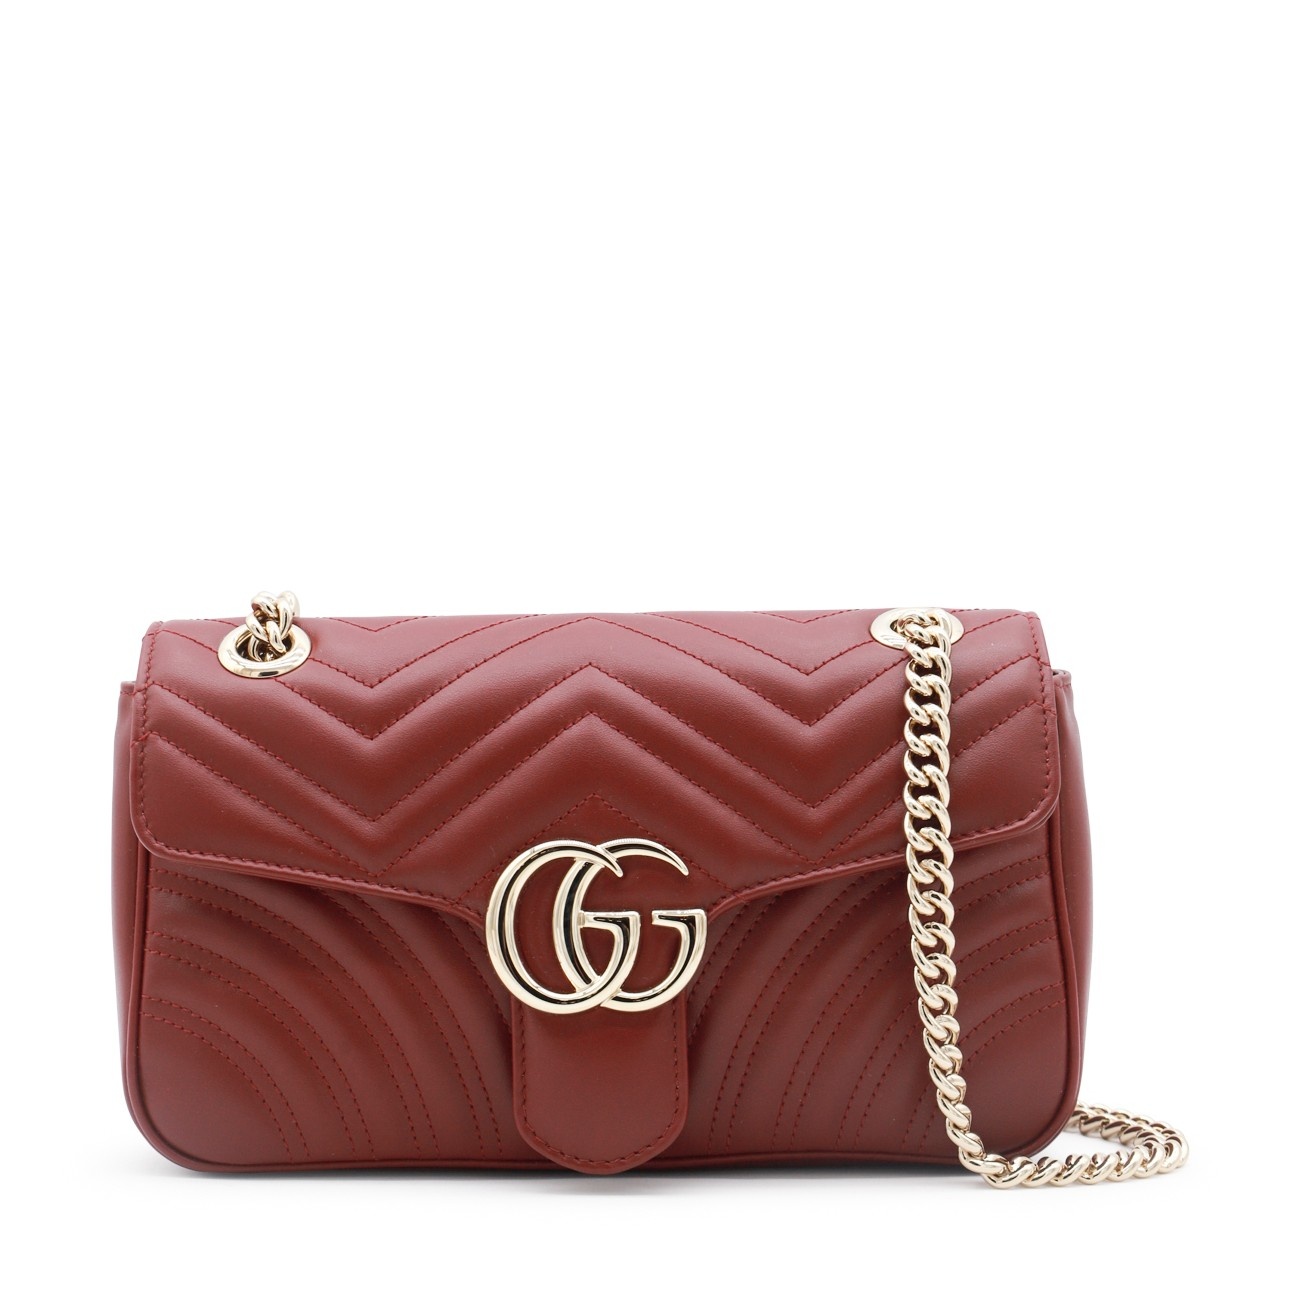 ancora red leather gg marmont 2.0 crossbody bag - 1